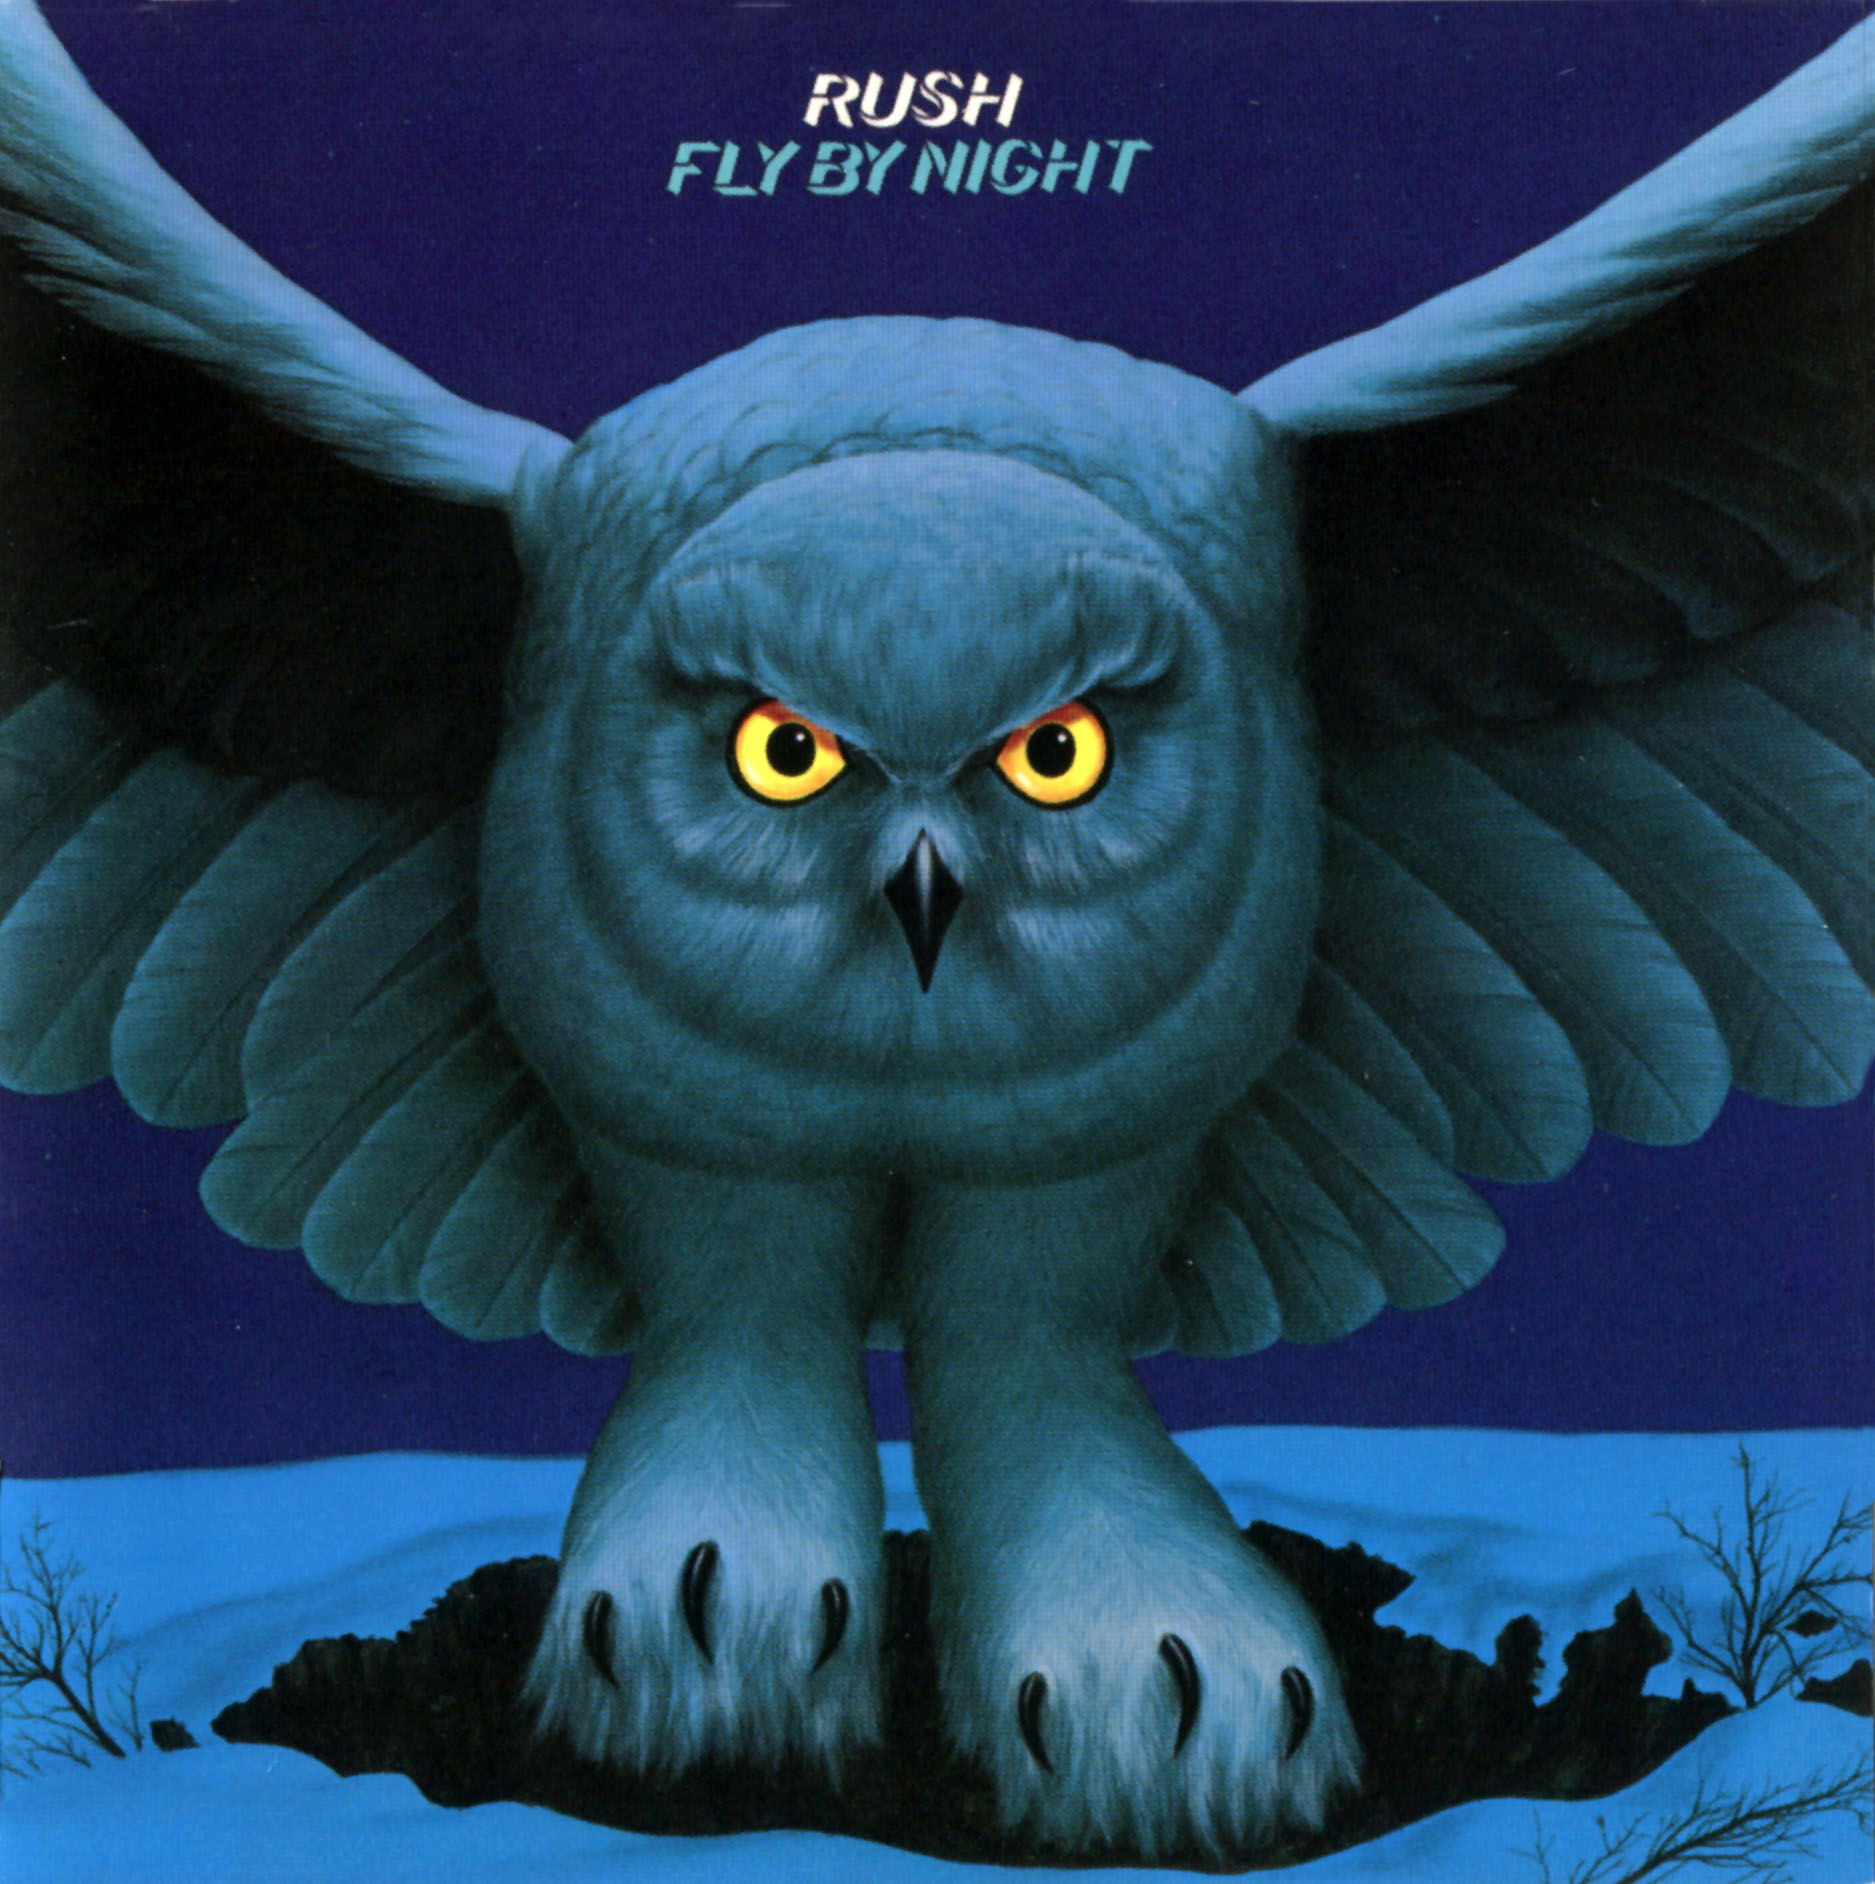 "Fly by Night" by Rush album cover